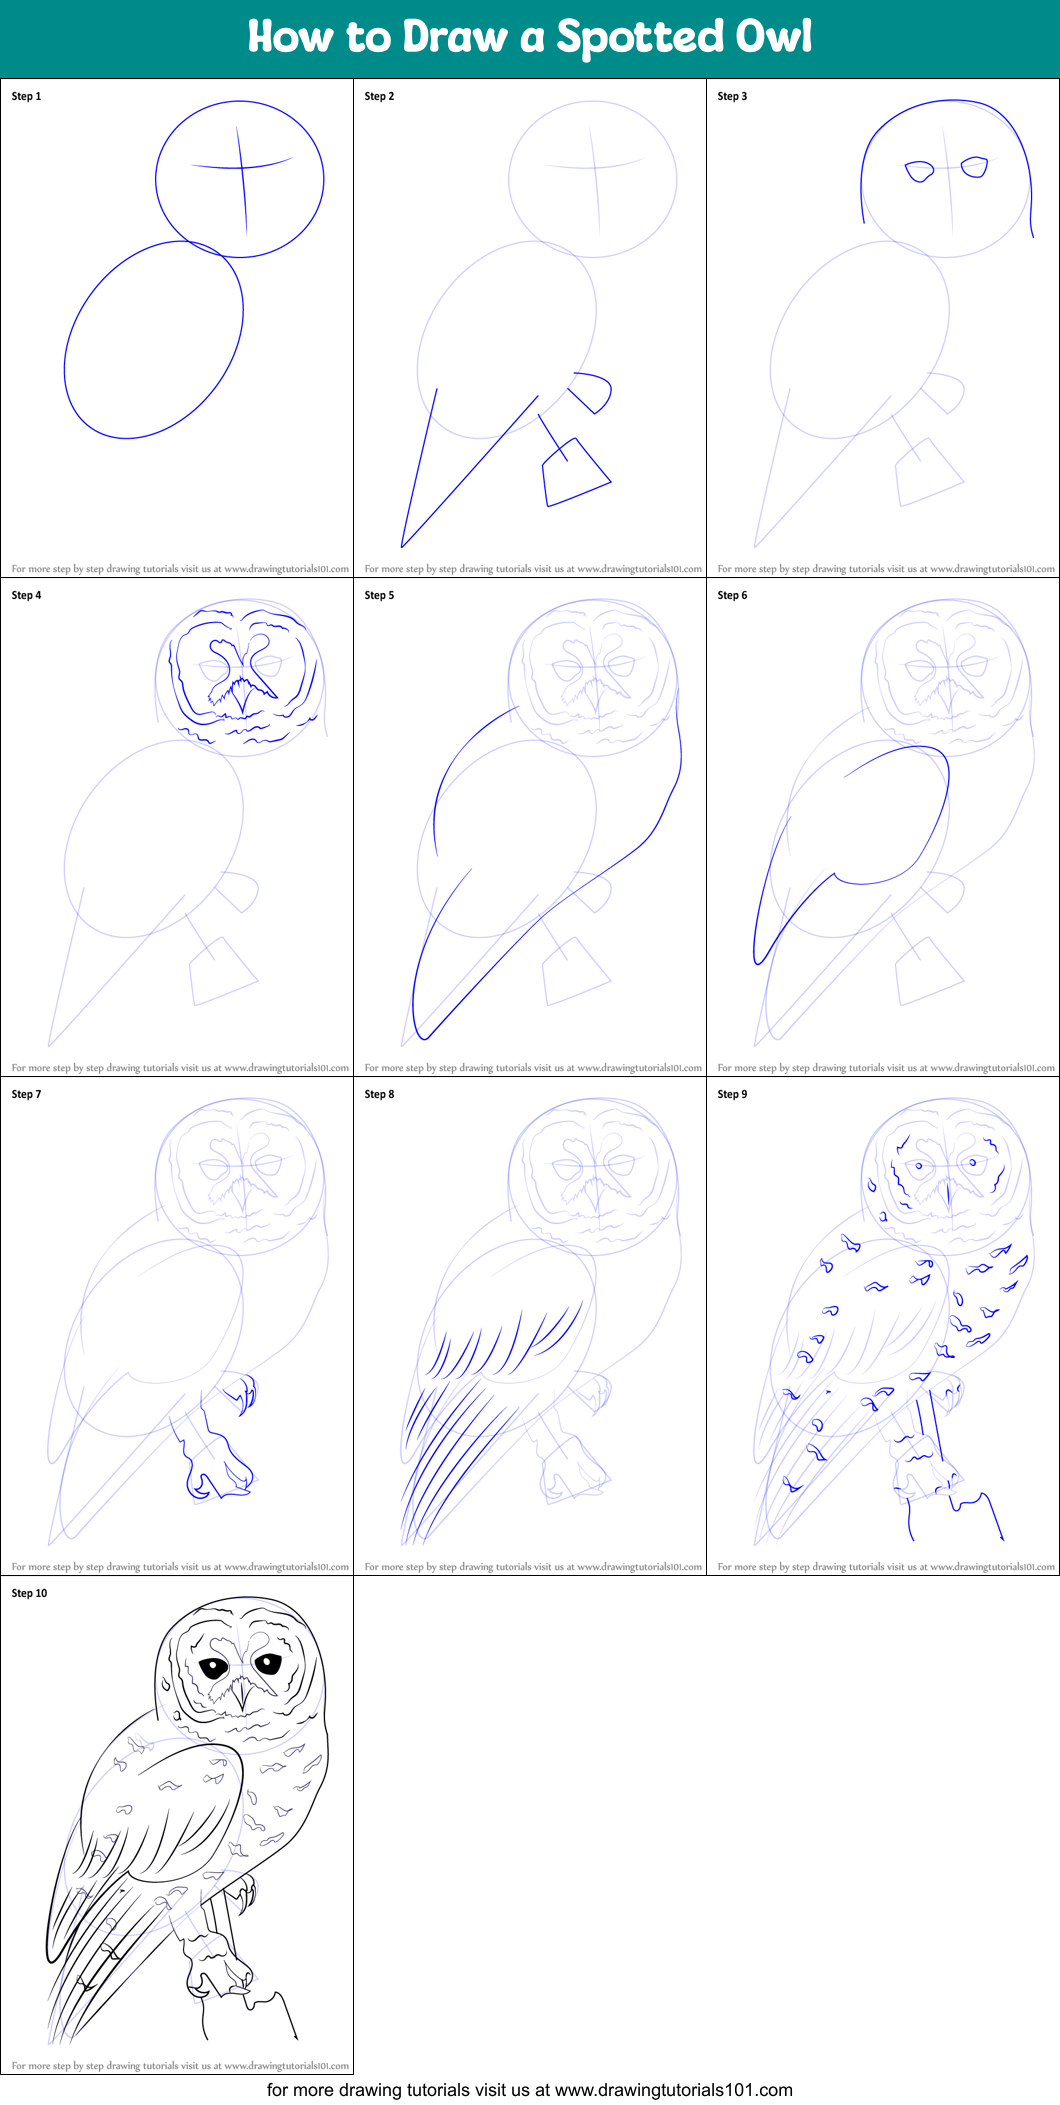 How to Draw a Spotted Owl printable step by step drawing sheet